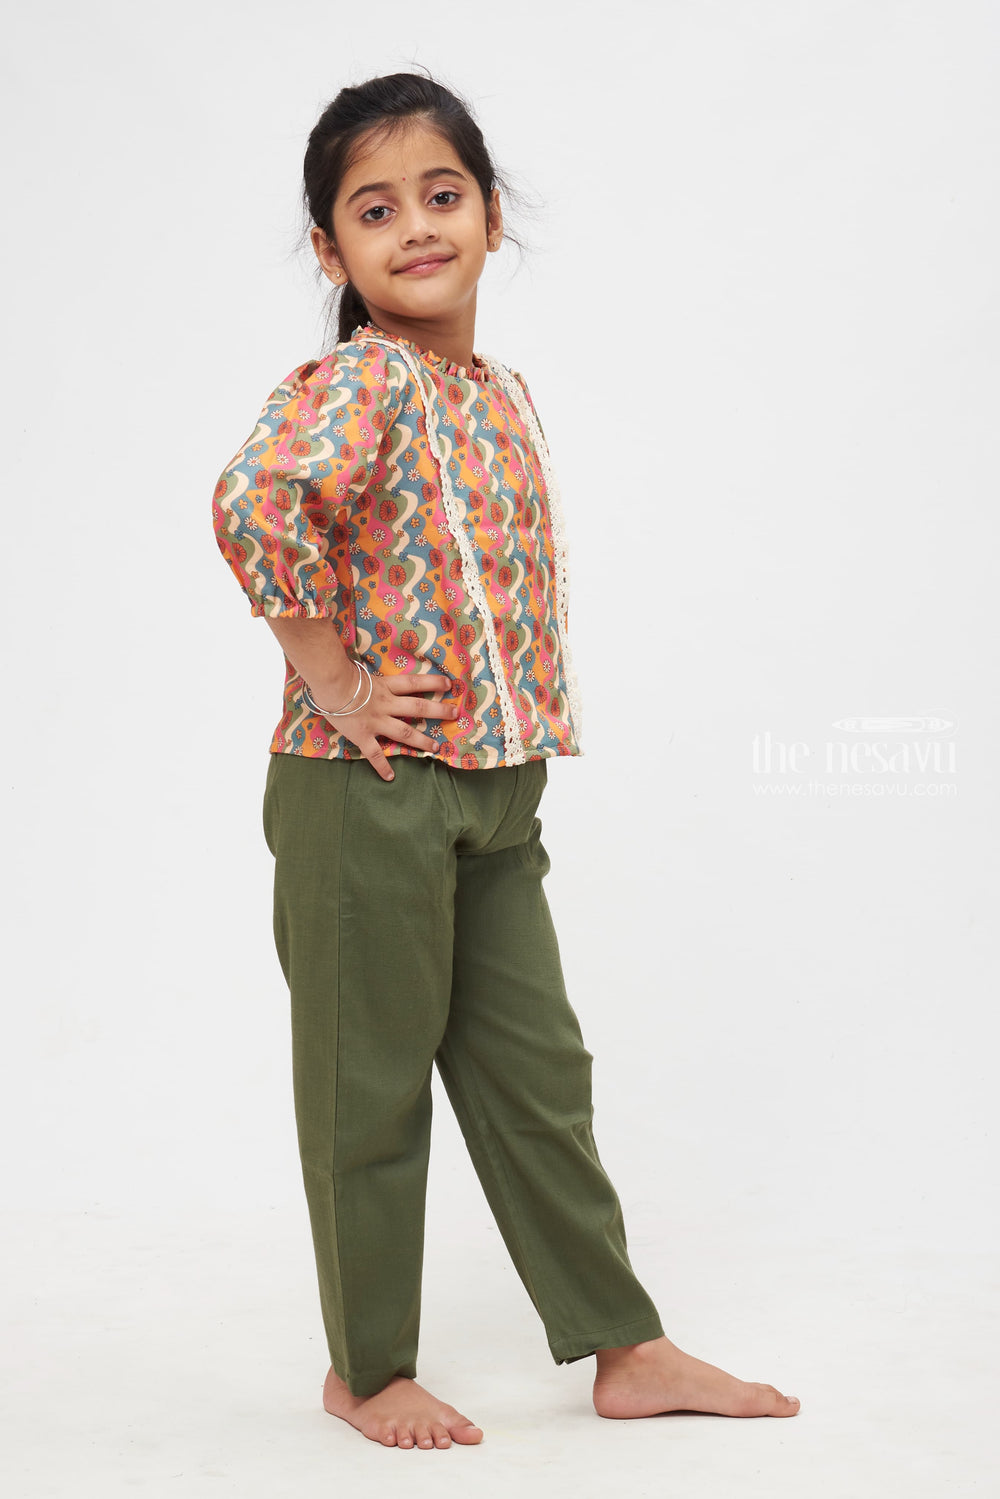 The Nesavu Girls Sharara / Plazo Set Whimsical Waves Lace-Trimmed Top with Solid Hue Trousers Set for Kids Nesavu Kids Vibrant Vignettes Collection | Stylish Sprouts Essentials | The Nesavu